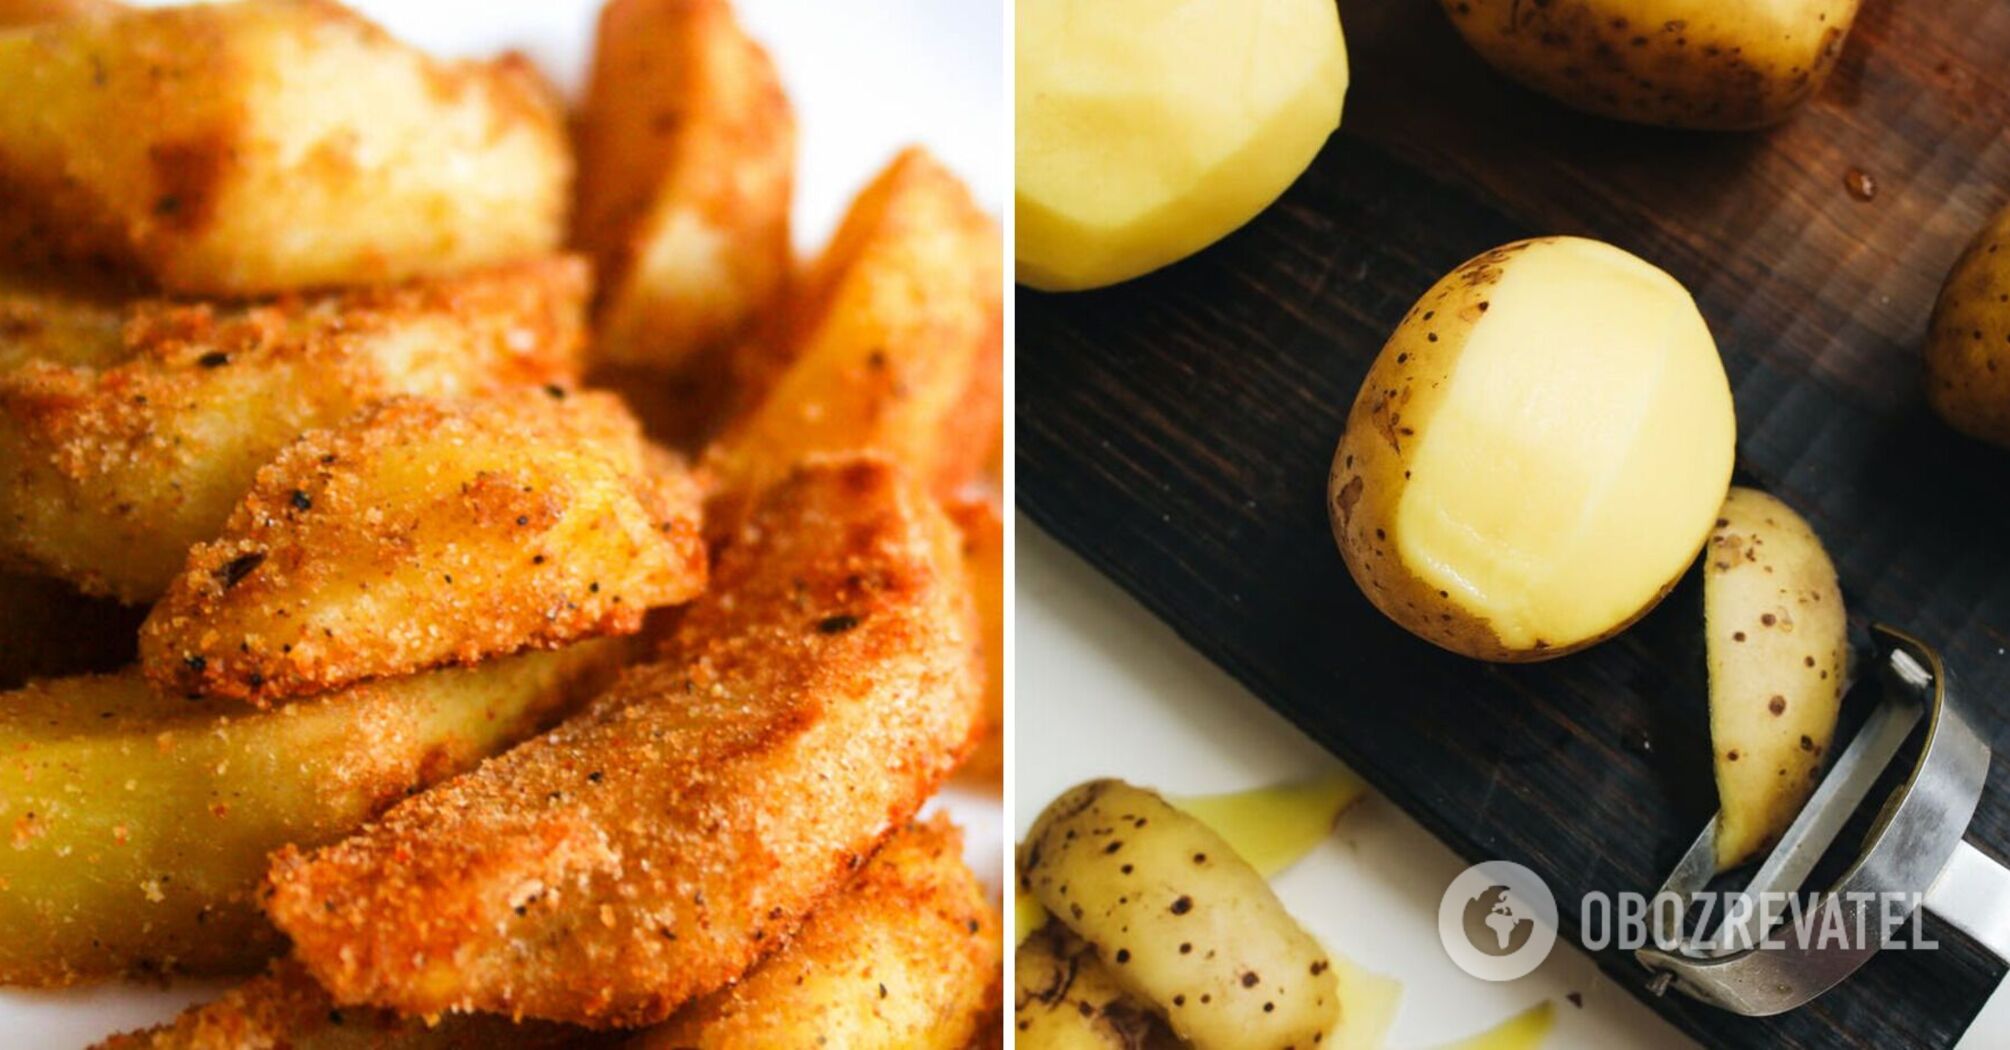 Country-style potatoes without frying: an unusual life hack